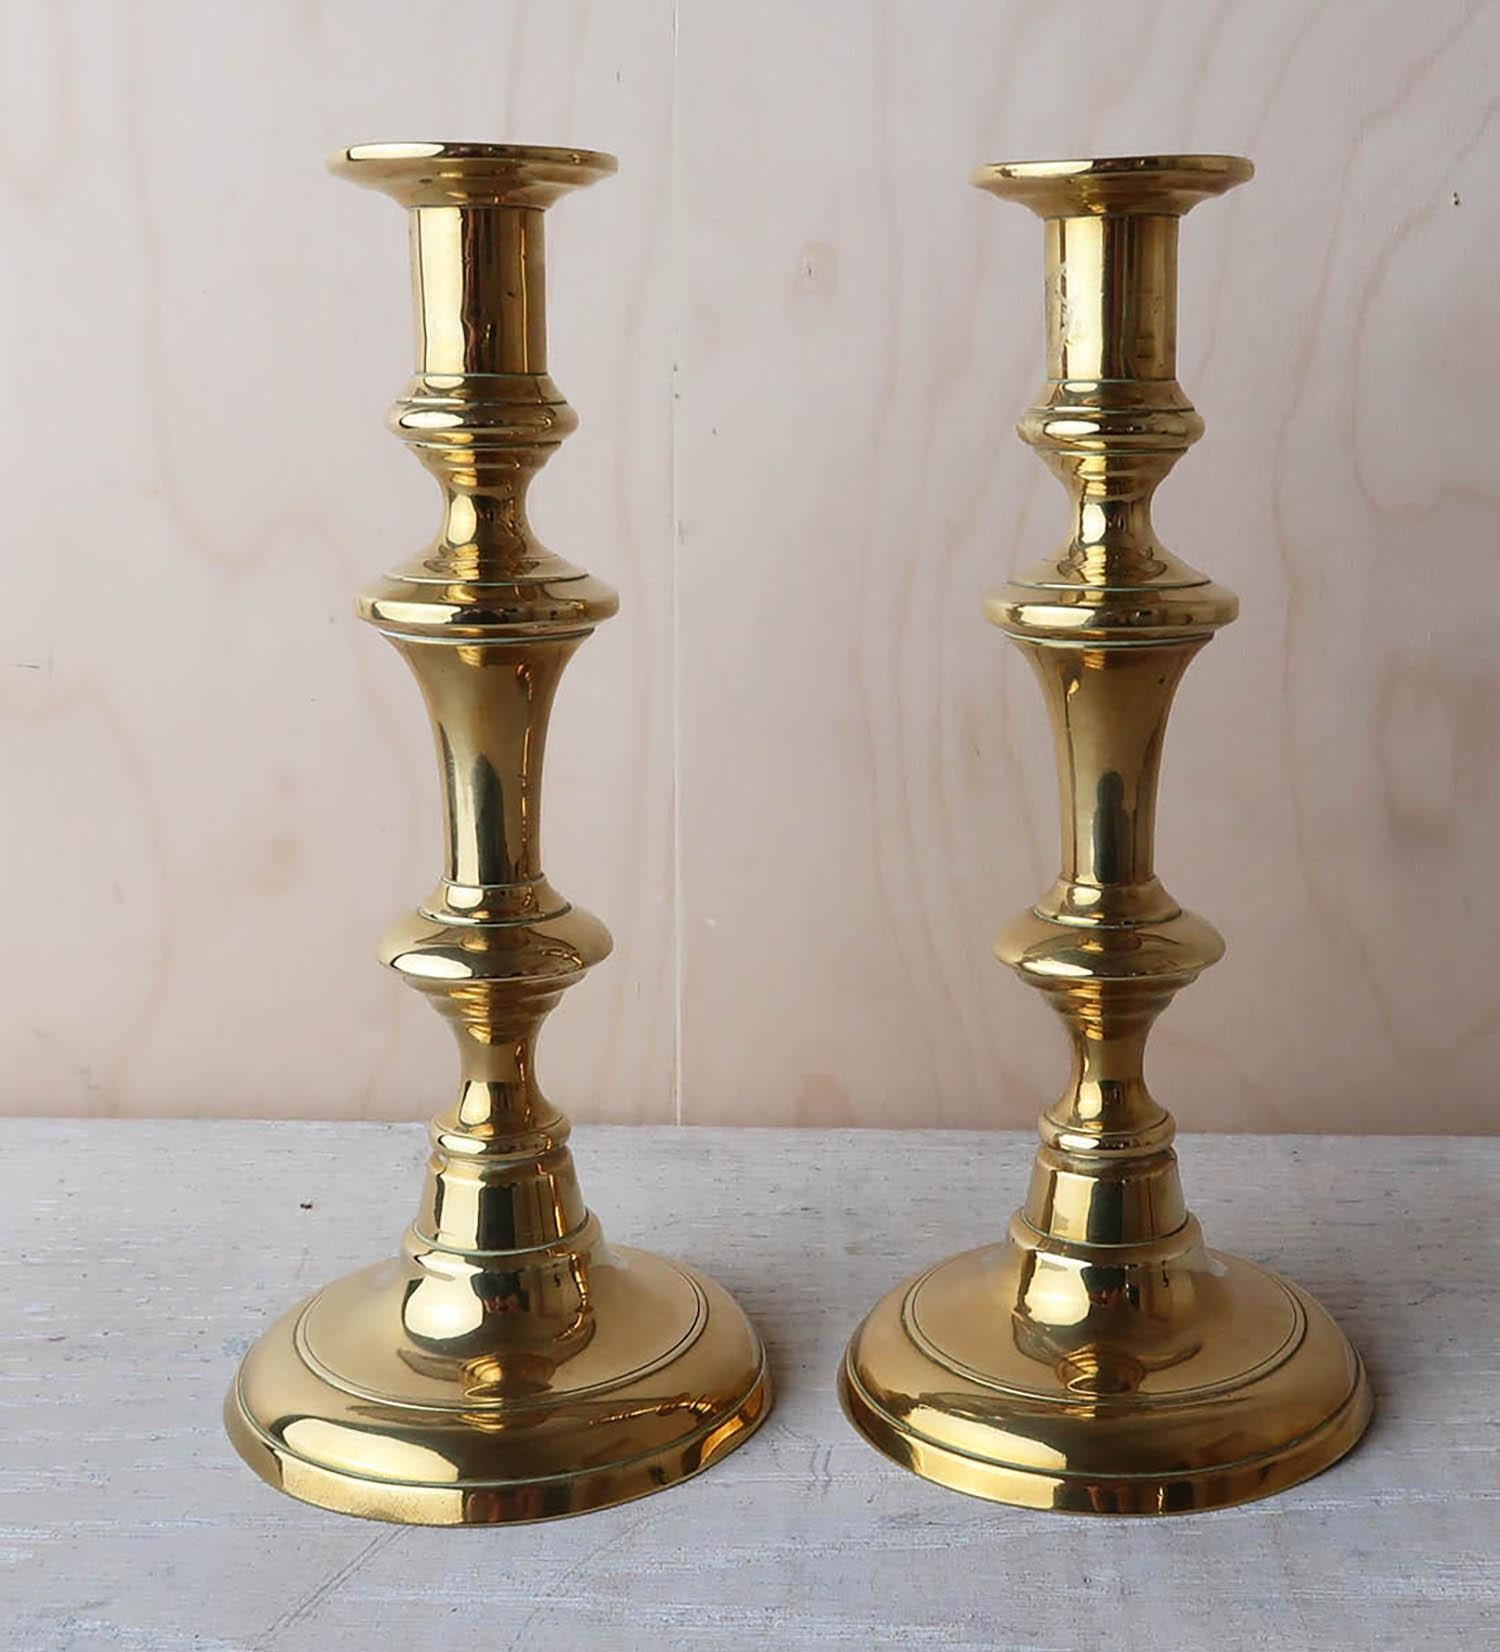 Nice pair of round base candlesticks.

Polished brass.

Good condition

